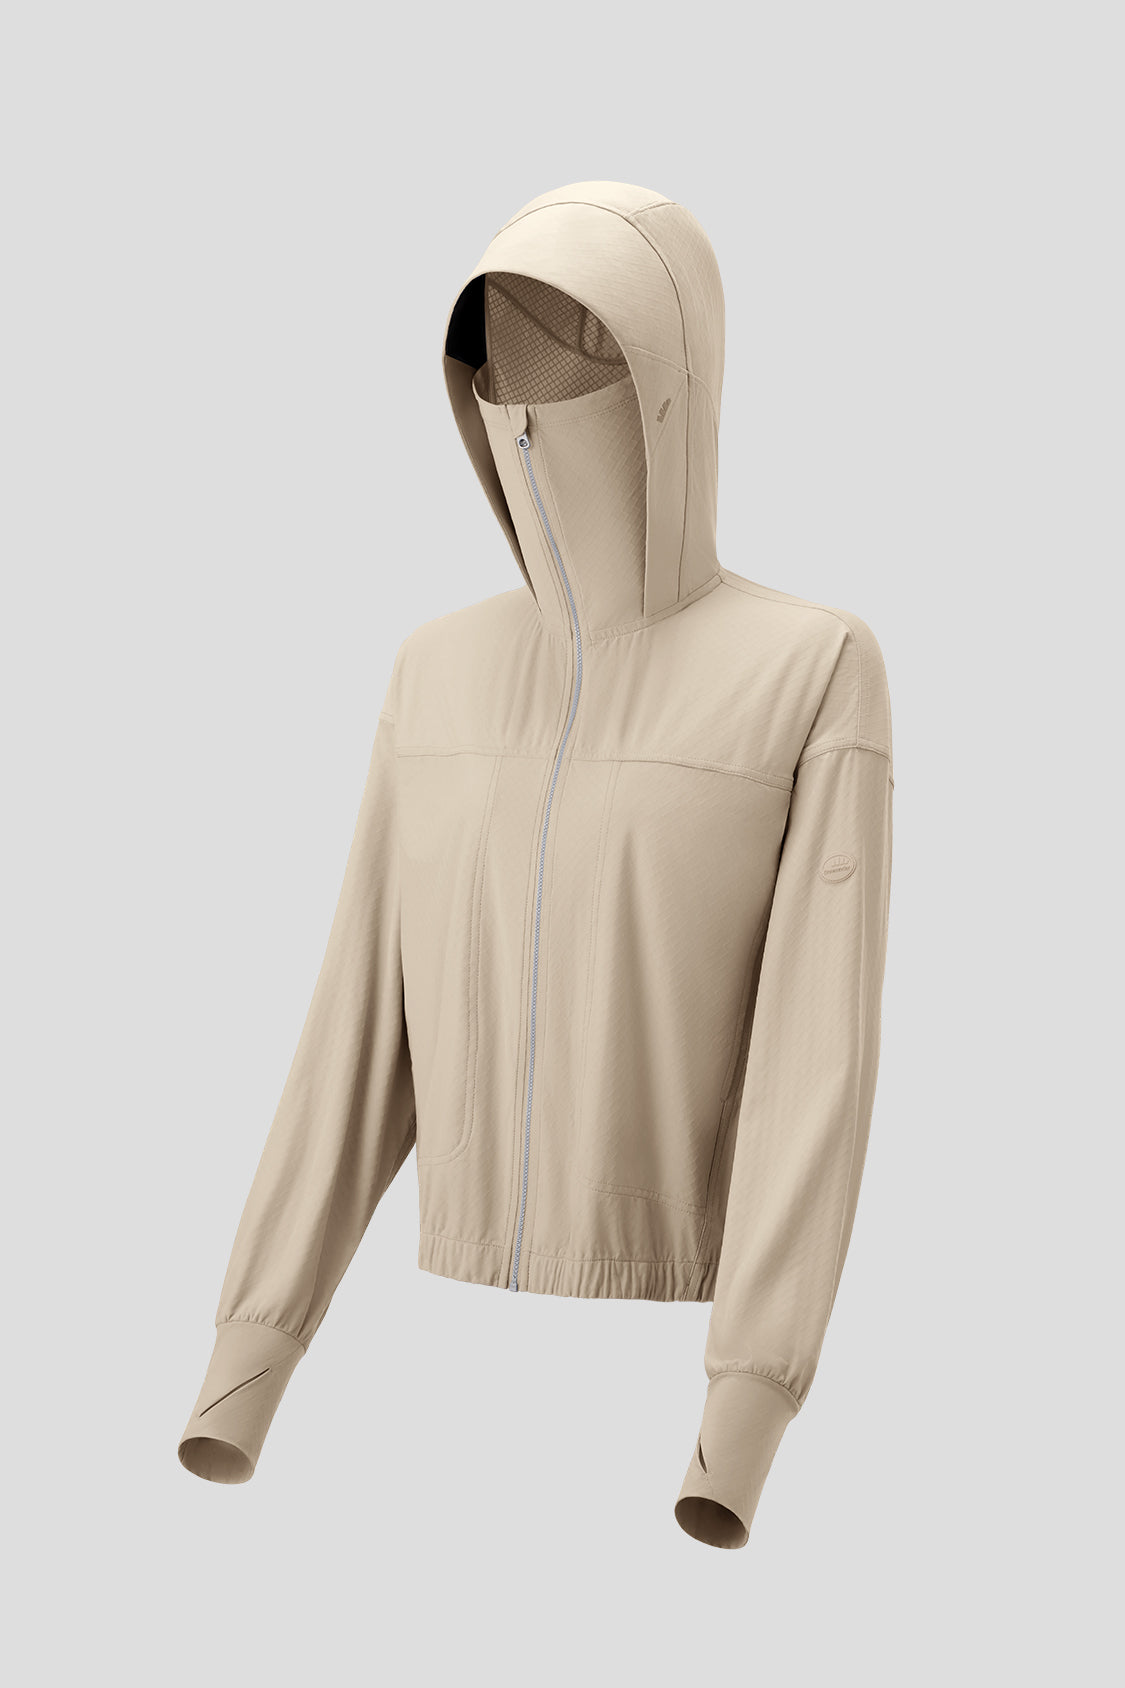 Buy Xiaomi Supield Full-band High-index Cool Breathable Sun Protection  Jacket